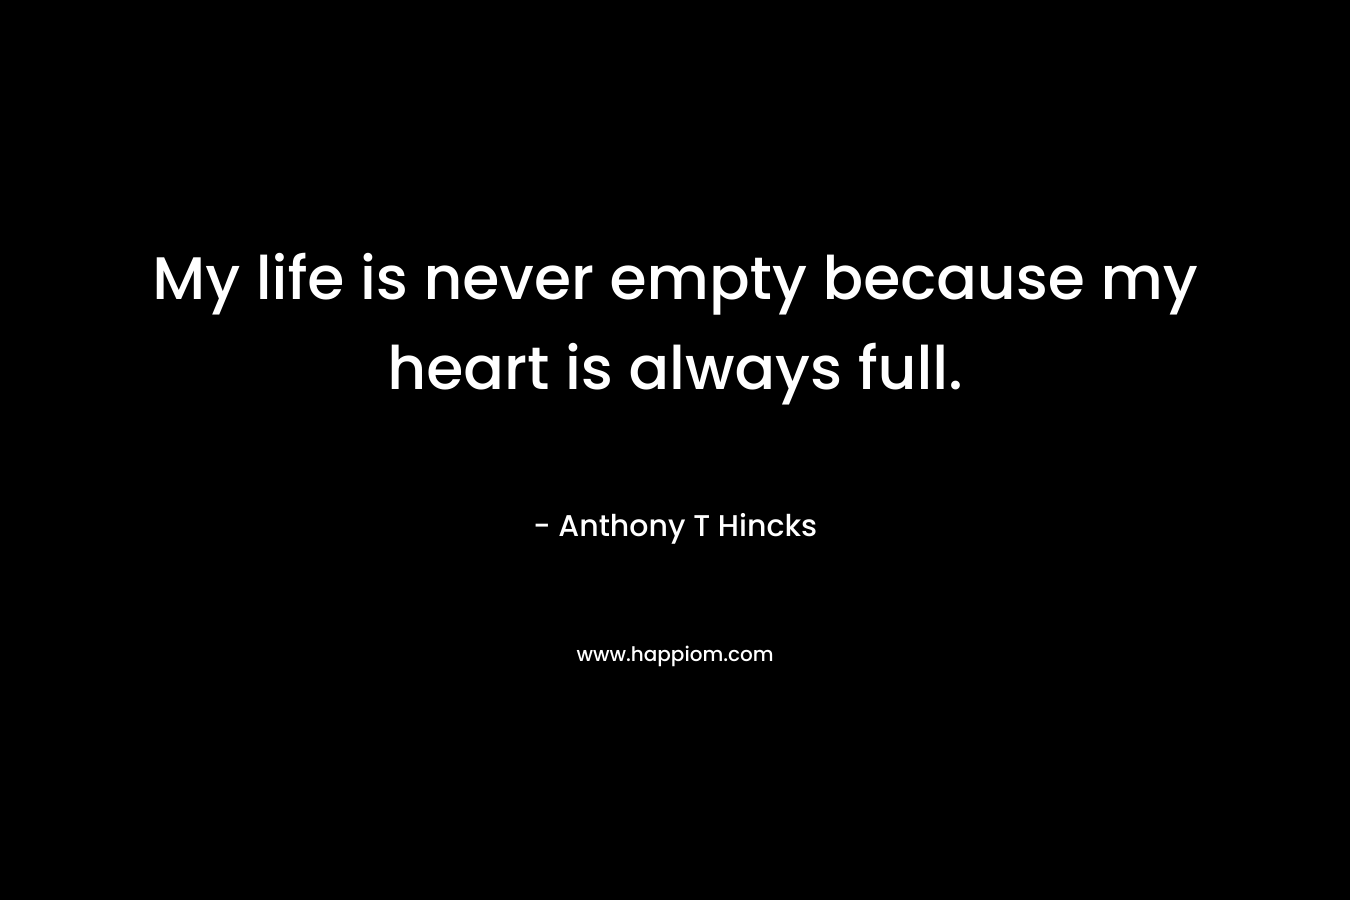 My life is never empty because my heart is always full.